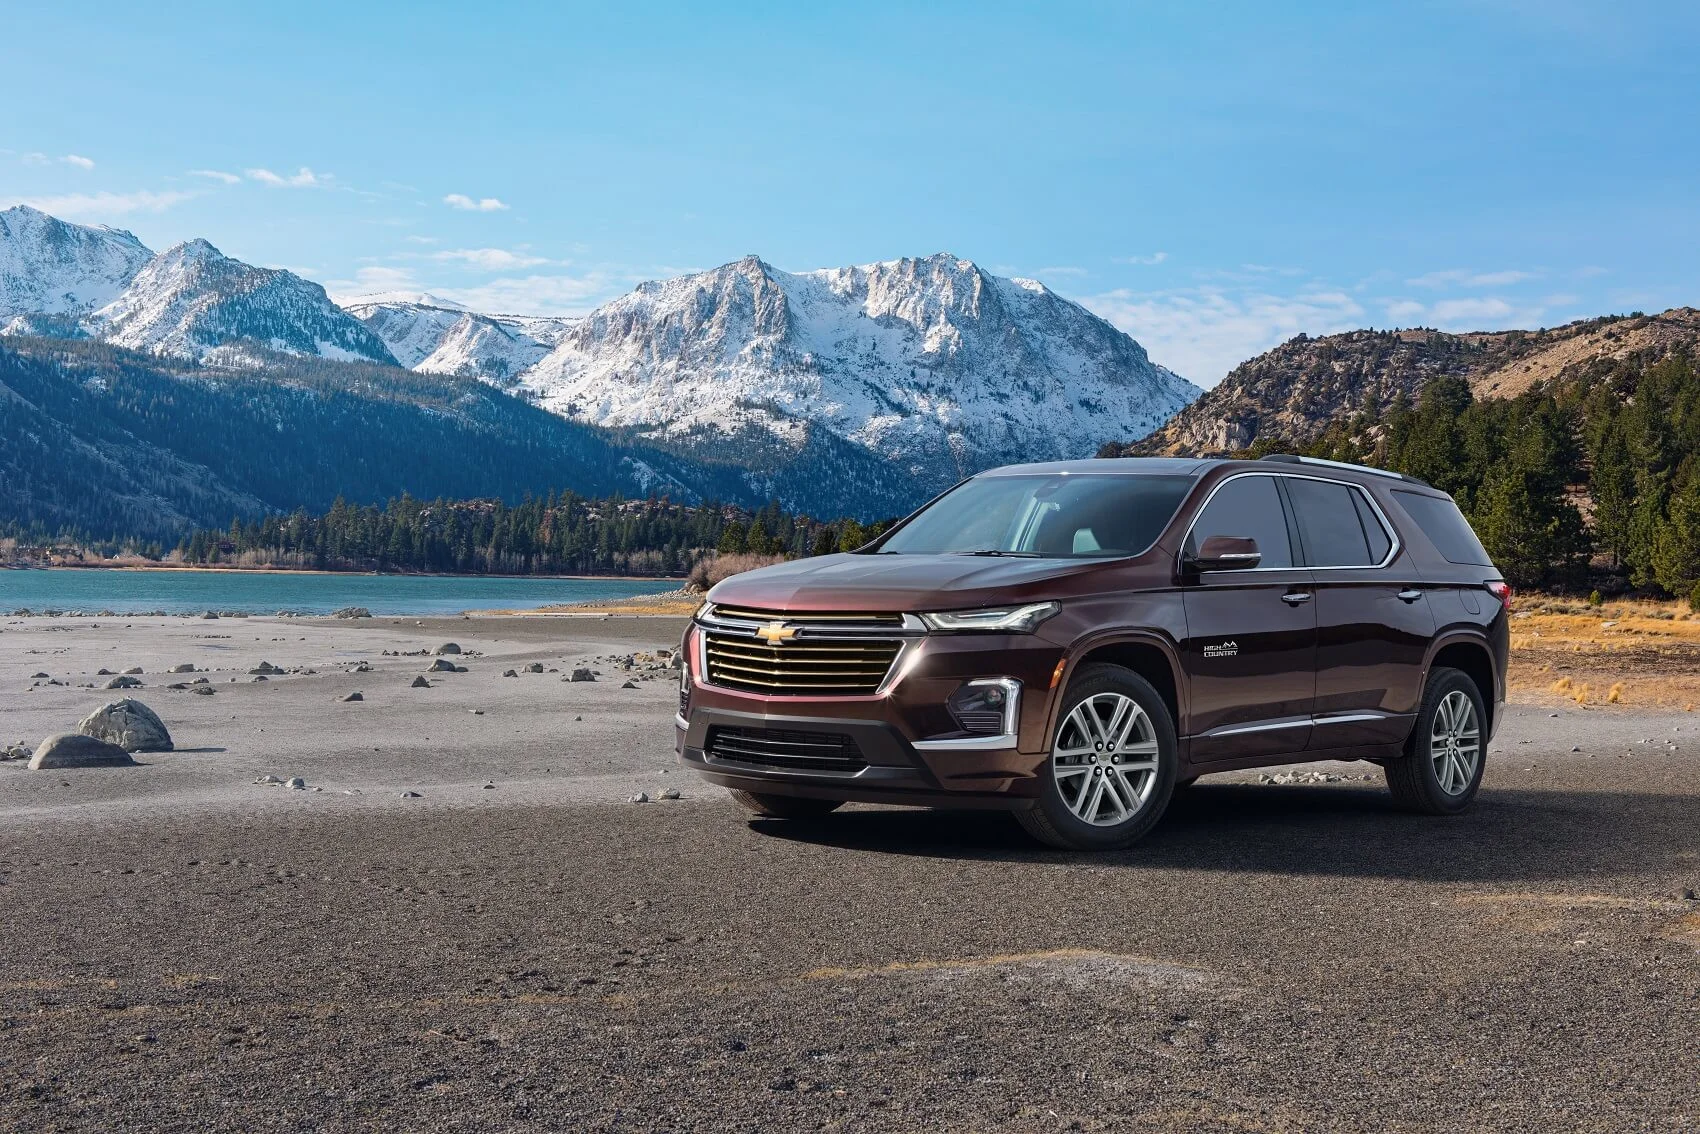 2022 Chevy Traverse in Front of Mountain